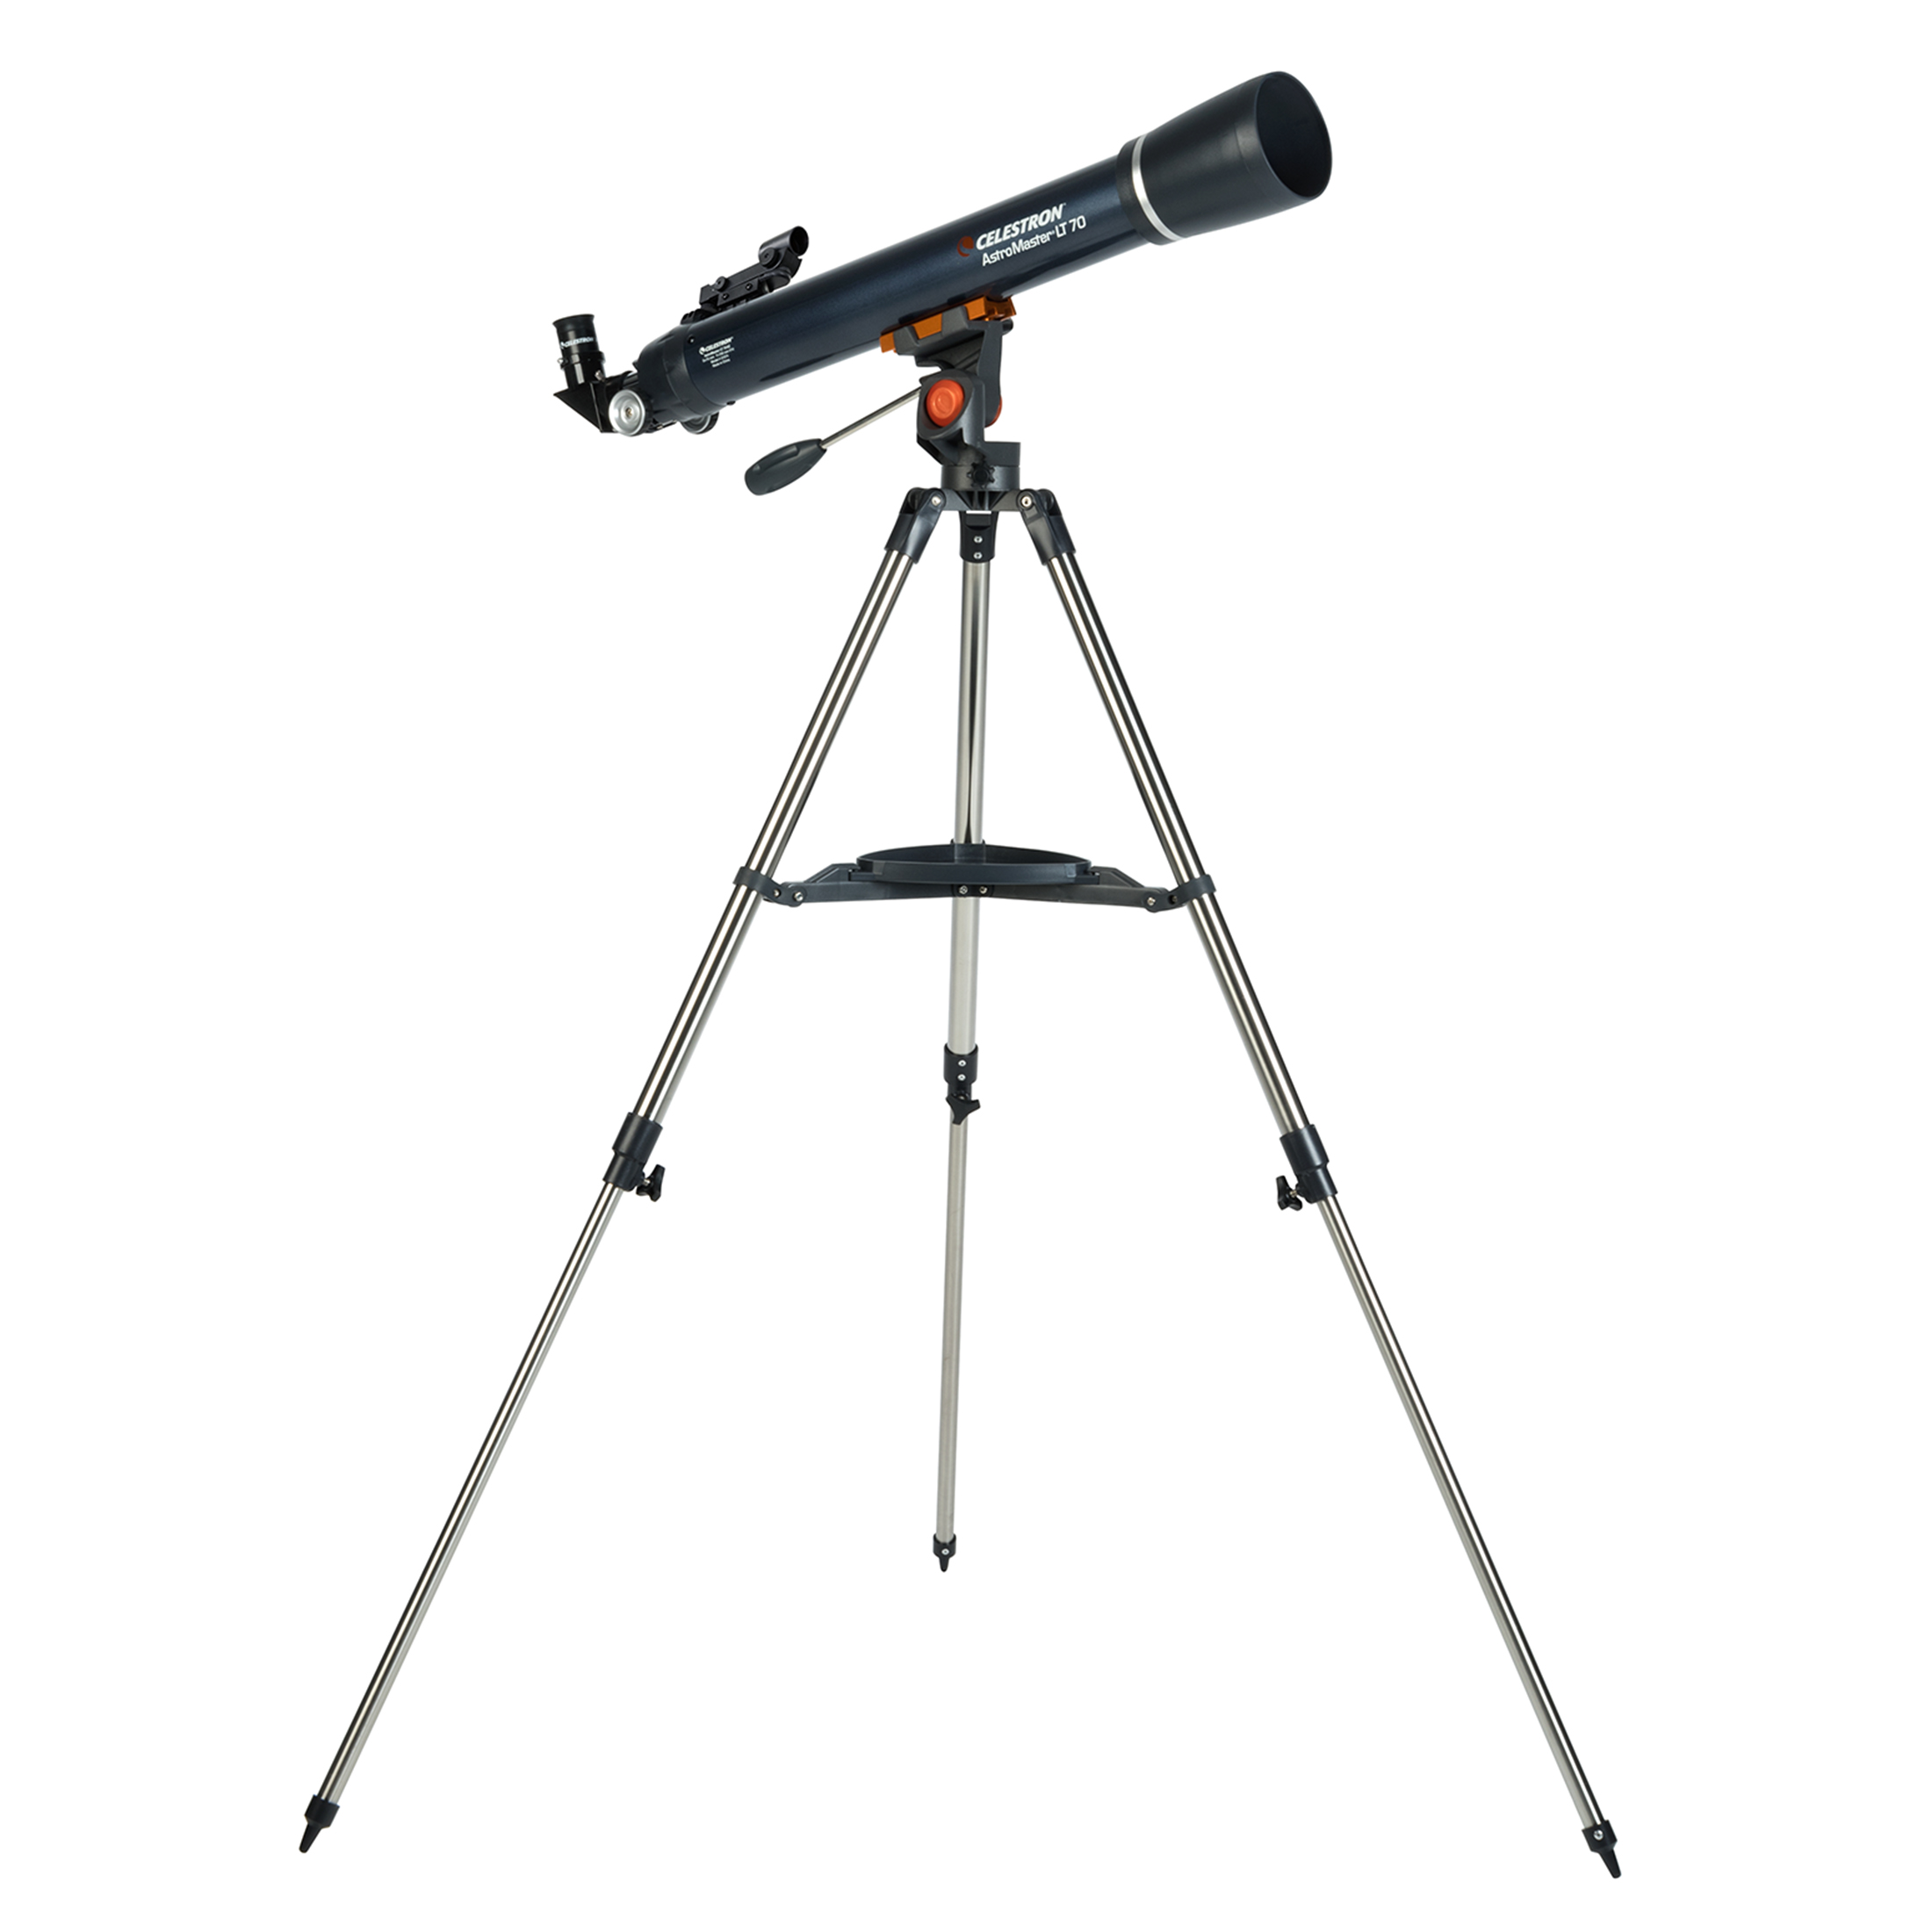 Celestron AstroMaster 70AZ LT Refractor Telescope Kit with Smartphone Adapter and Bluetooth Remote, Ideal Telescope for Beginners, Capture Your Own Images, Tripod plus Bonus Accessories Included - image 4 of 8